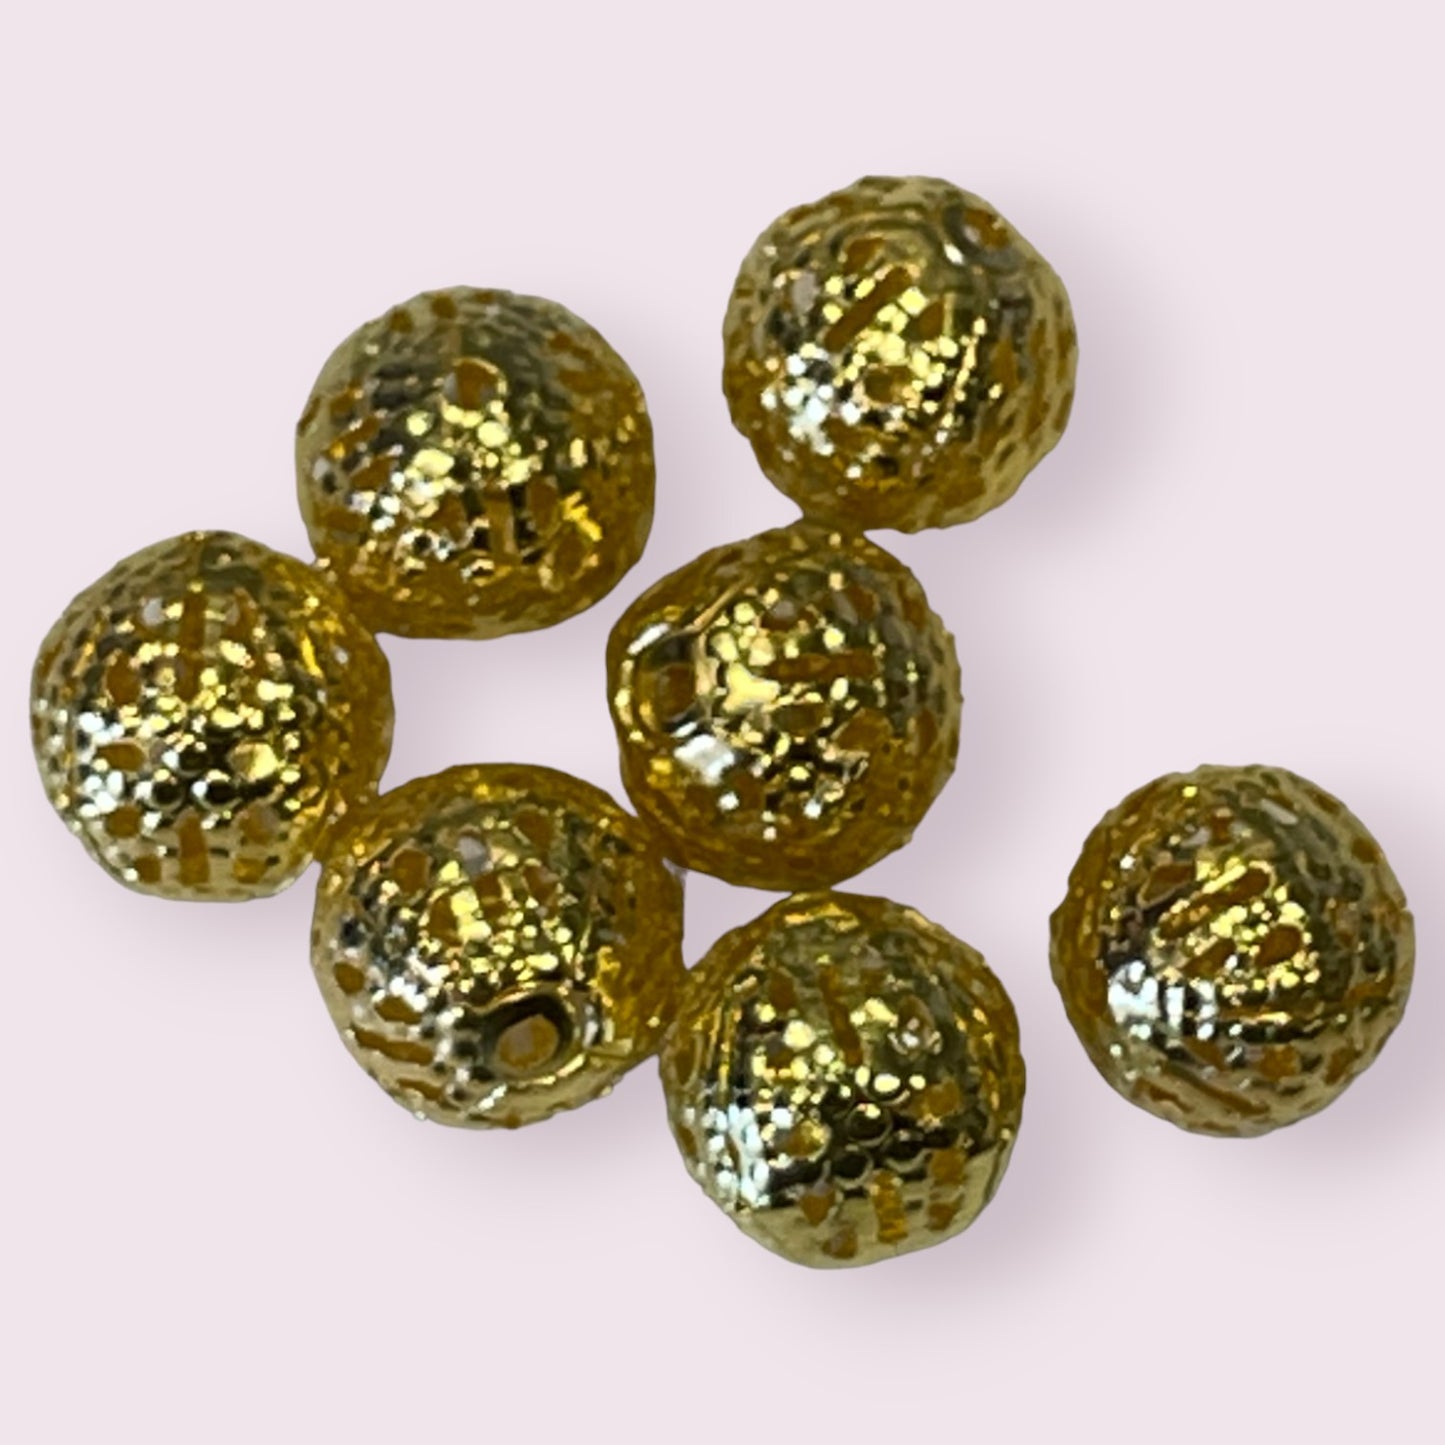 Gold Filigree Beads - metal base - 6mm, 8mm and 10mm - 50 pack